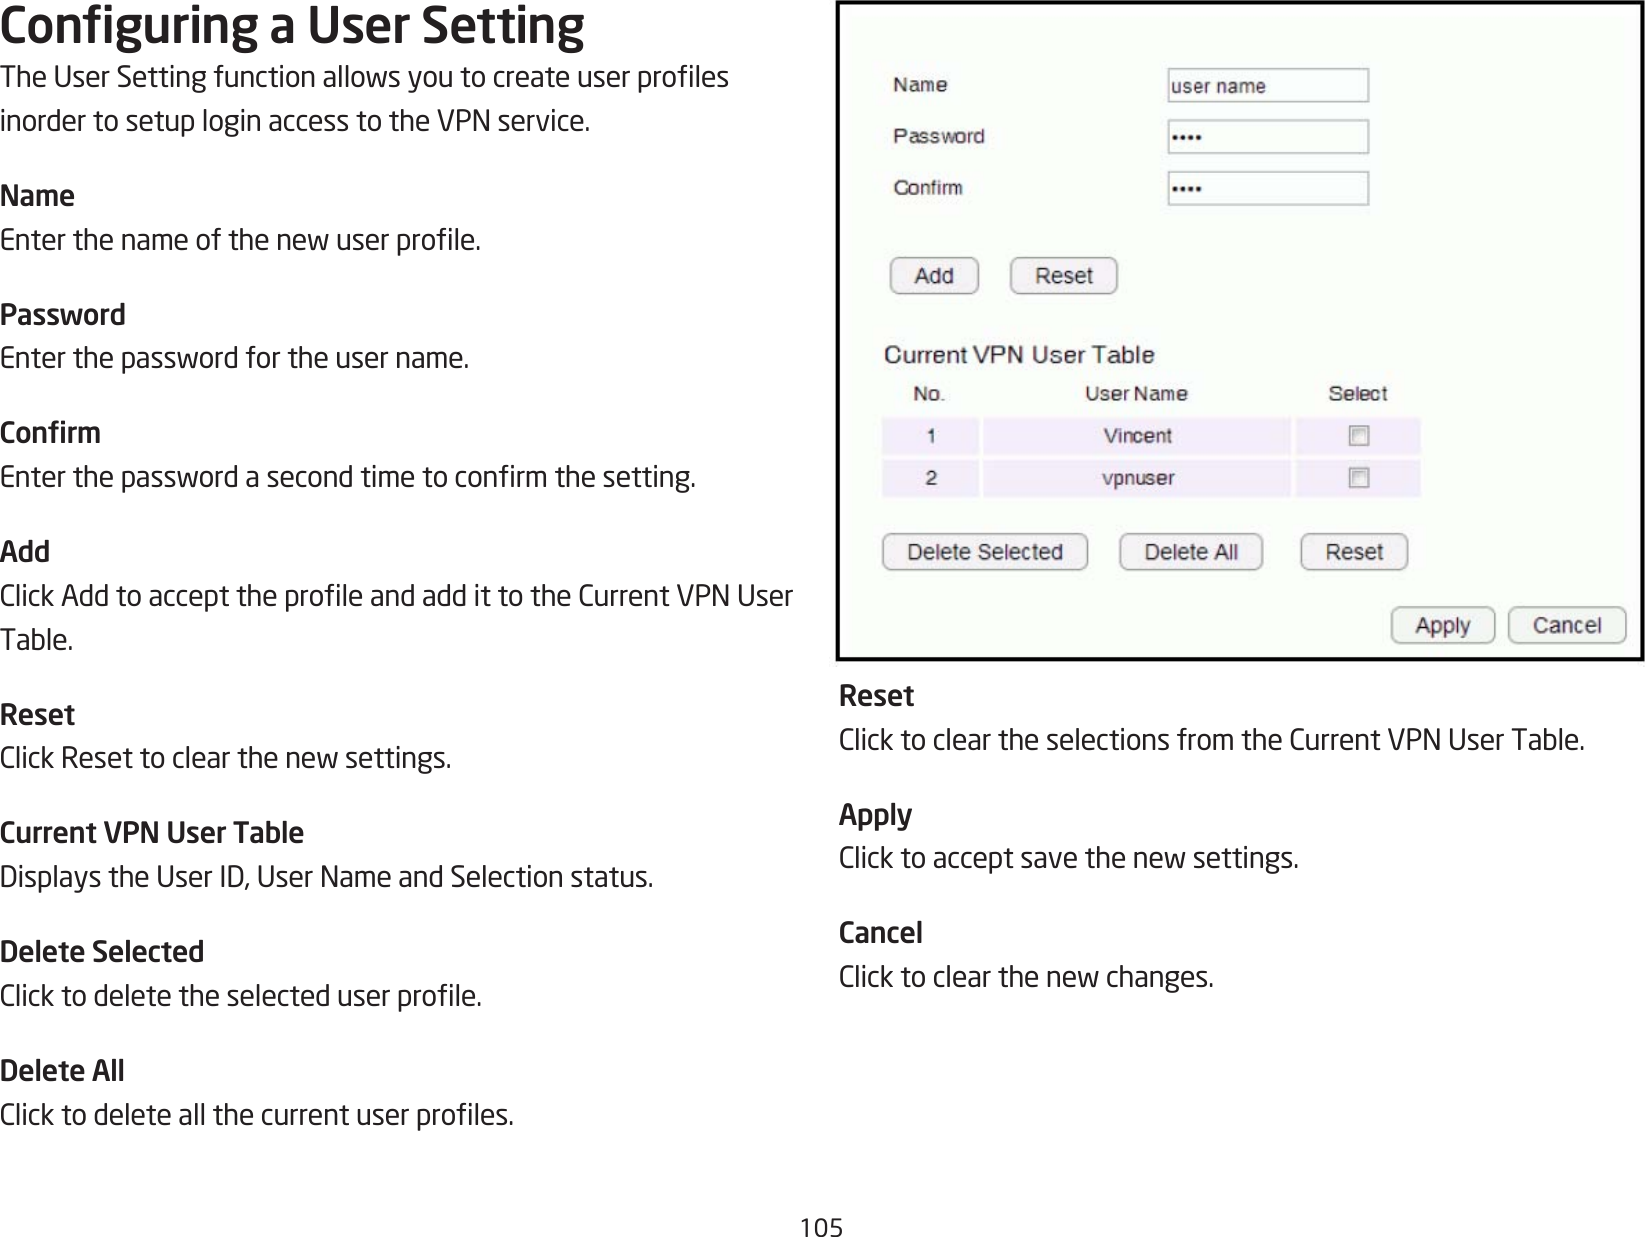 105Conguring a User SettingTheUserSettingfunctionallowsyoutocreateuserprolesinordertosetuploginaccesstotheVPNservice.NameEnterthenameofthenewuserprole.PasswordEnterthepasswordfortheusername.ConrmEnterthepasswordasecondtimetoconrmthesetting.AddClickAddtoaccepttheproleandaddittotheCurrentVPNUserTable.ResetClickResettoclearthenewsettings.Current VPN User TableDisplaystheUserID,UserNameandSelectionstatus.Delete SelectedClicktodeletetheselecteduserprole.Delete AllClicktodeleteallthecurrentuserproles.ResetClicktocleartheselectionsfromtheCurrentVPNUserTable.ApplyClicktoacceptsavethenewsettings.CancelClicktoclearthenewchanges.